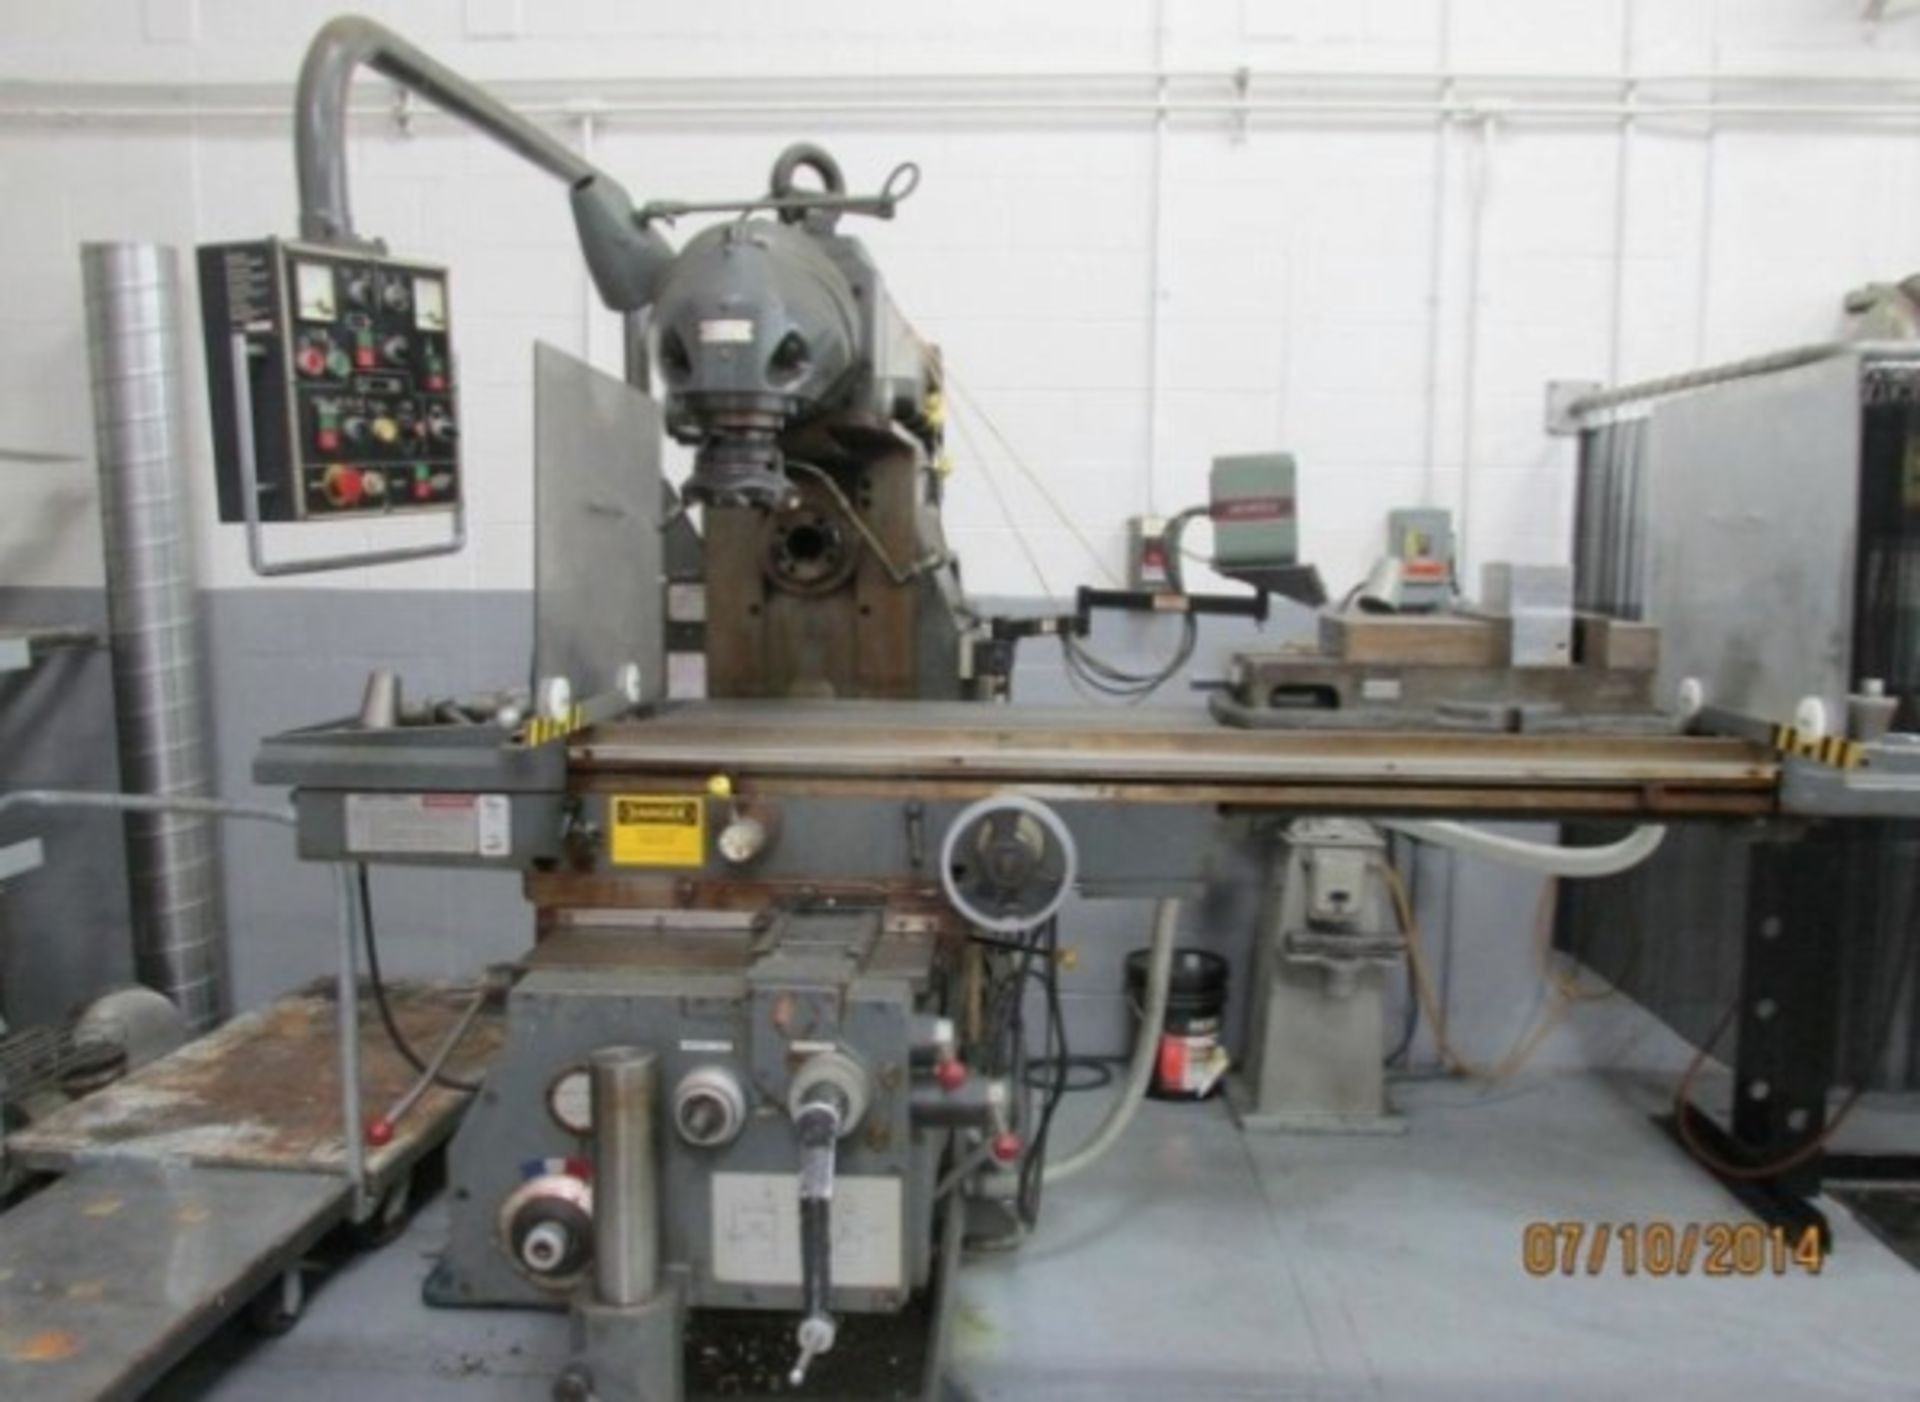 Lot 21: Lagun FCM-1800 Knee Mill – Uninstalled Located in Marysville, OH - Plant to Load on Buyers